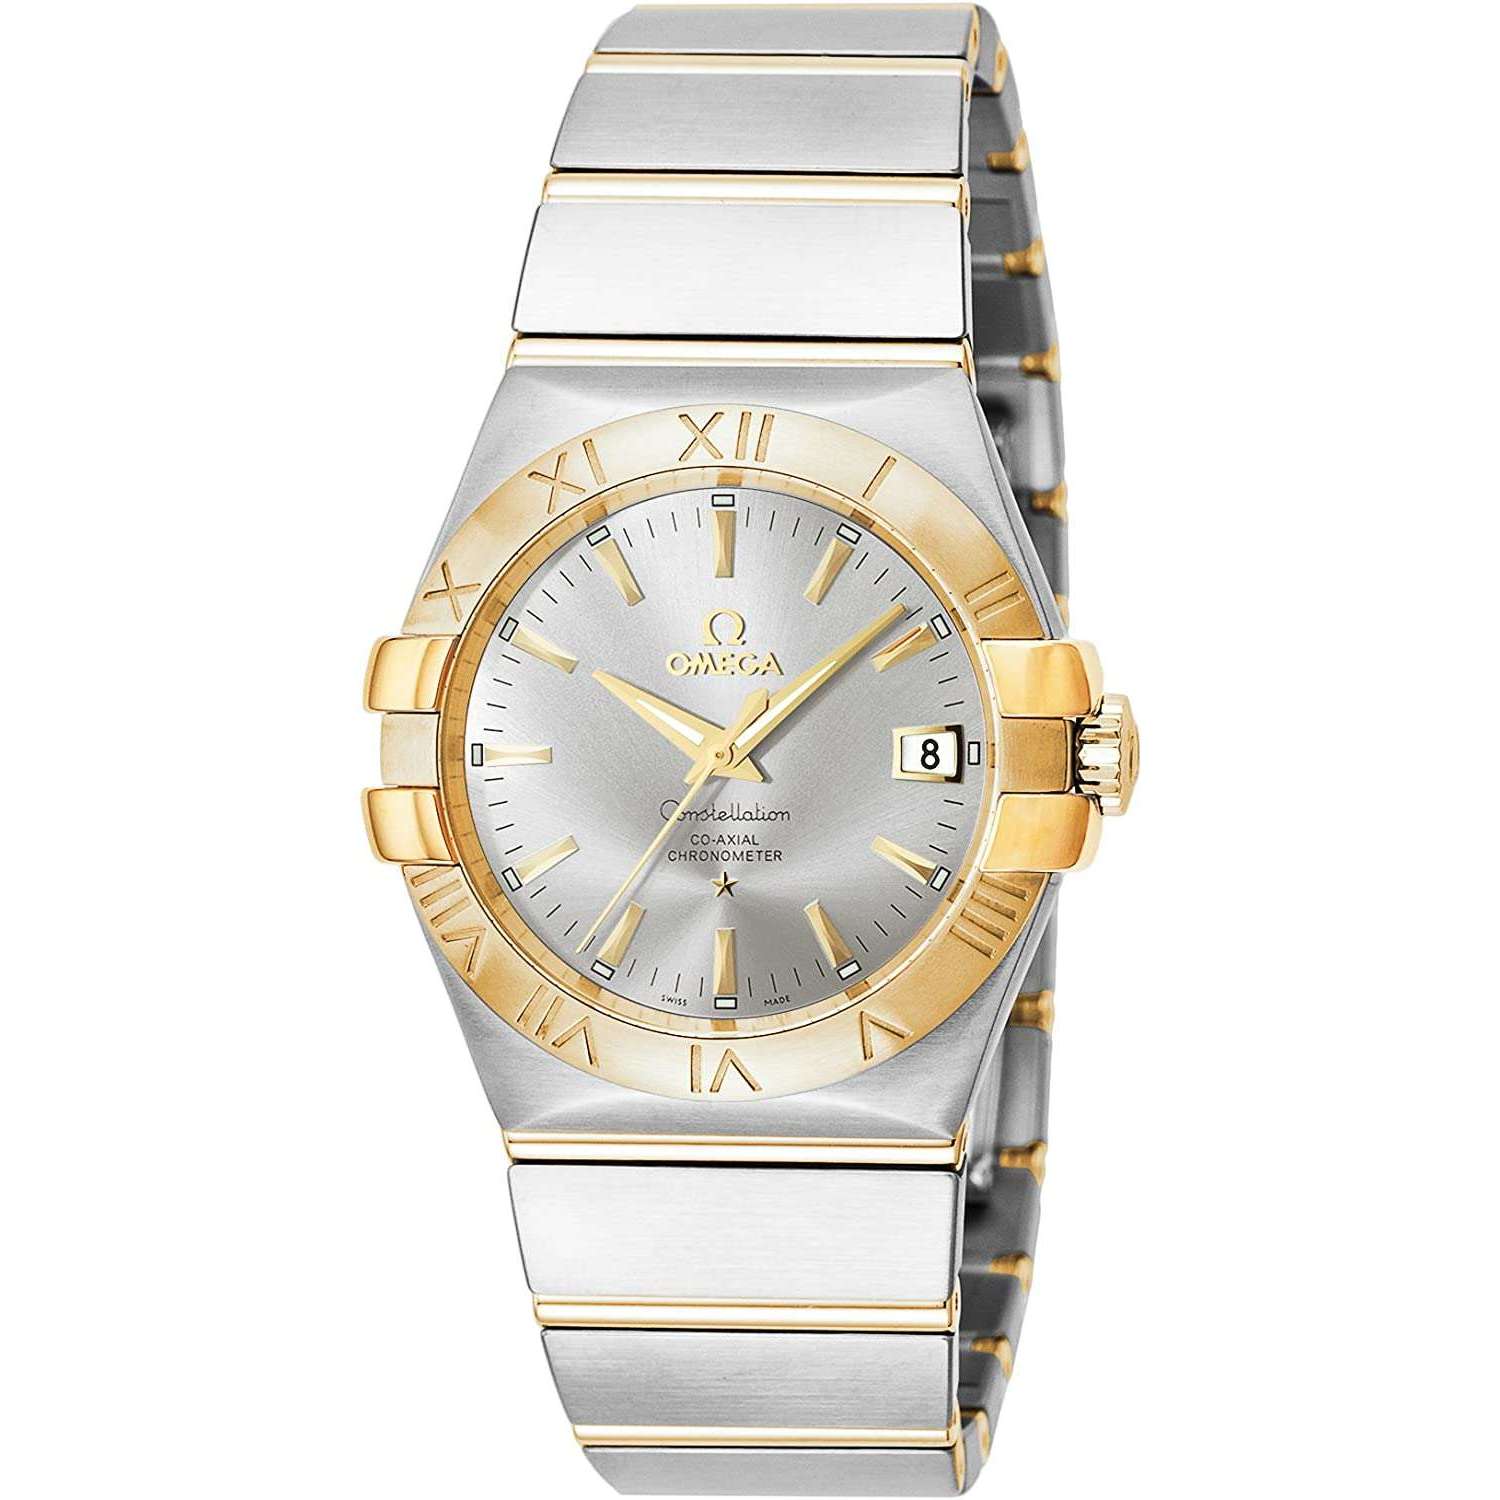 OMEGA CONSTELLATION CO-AXIAL CHRONOMETER 34.5 MM MEN WATCH 123.20.35.20.02.002 - ROOK JAPAN